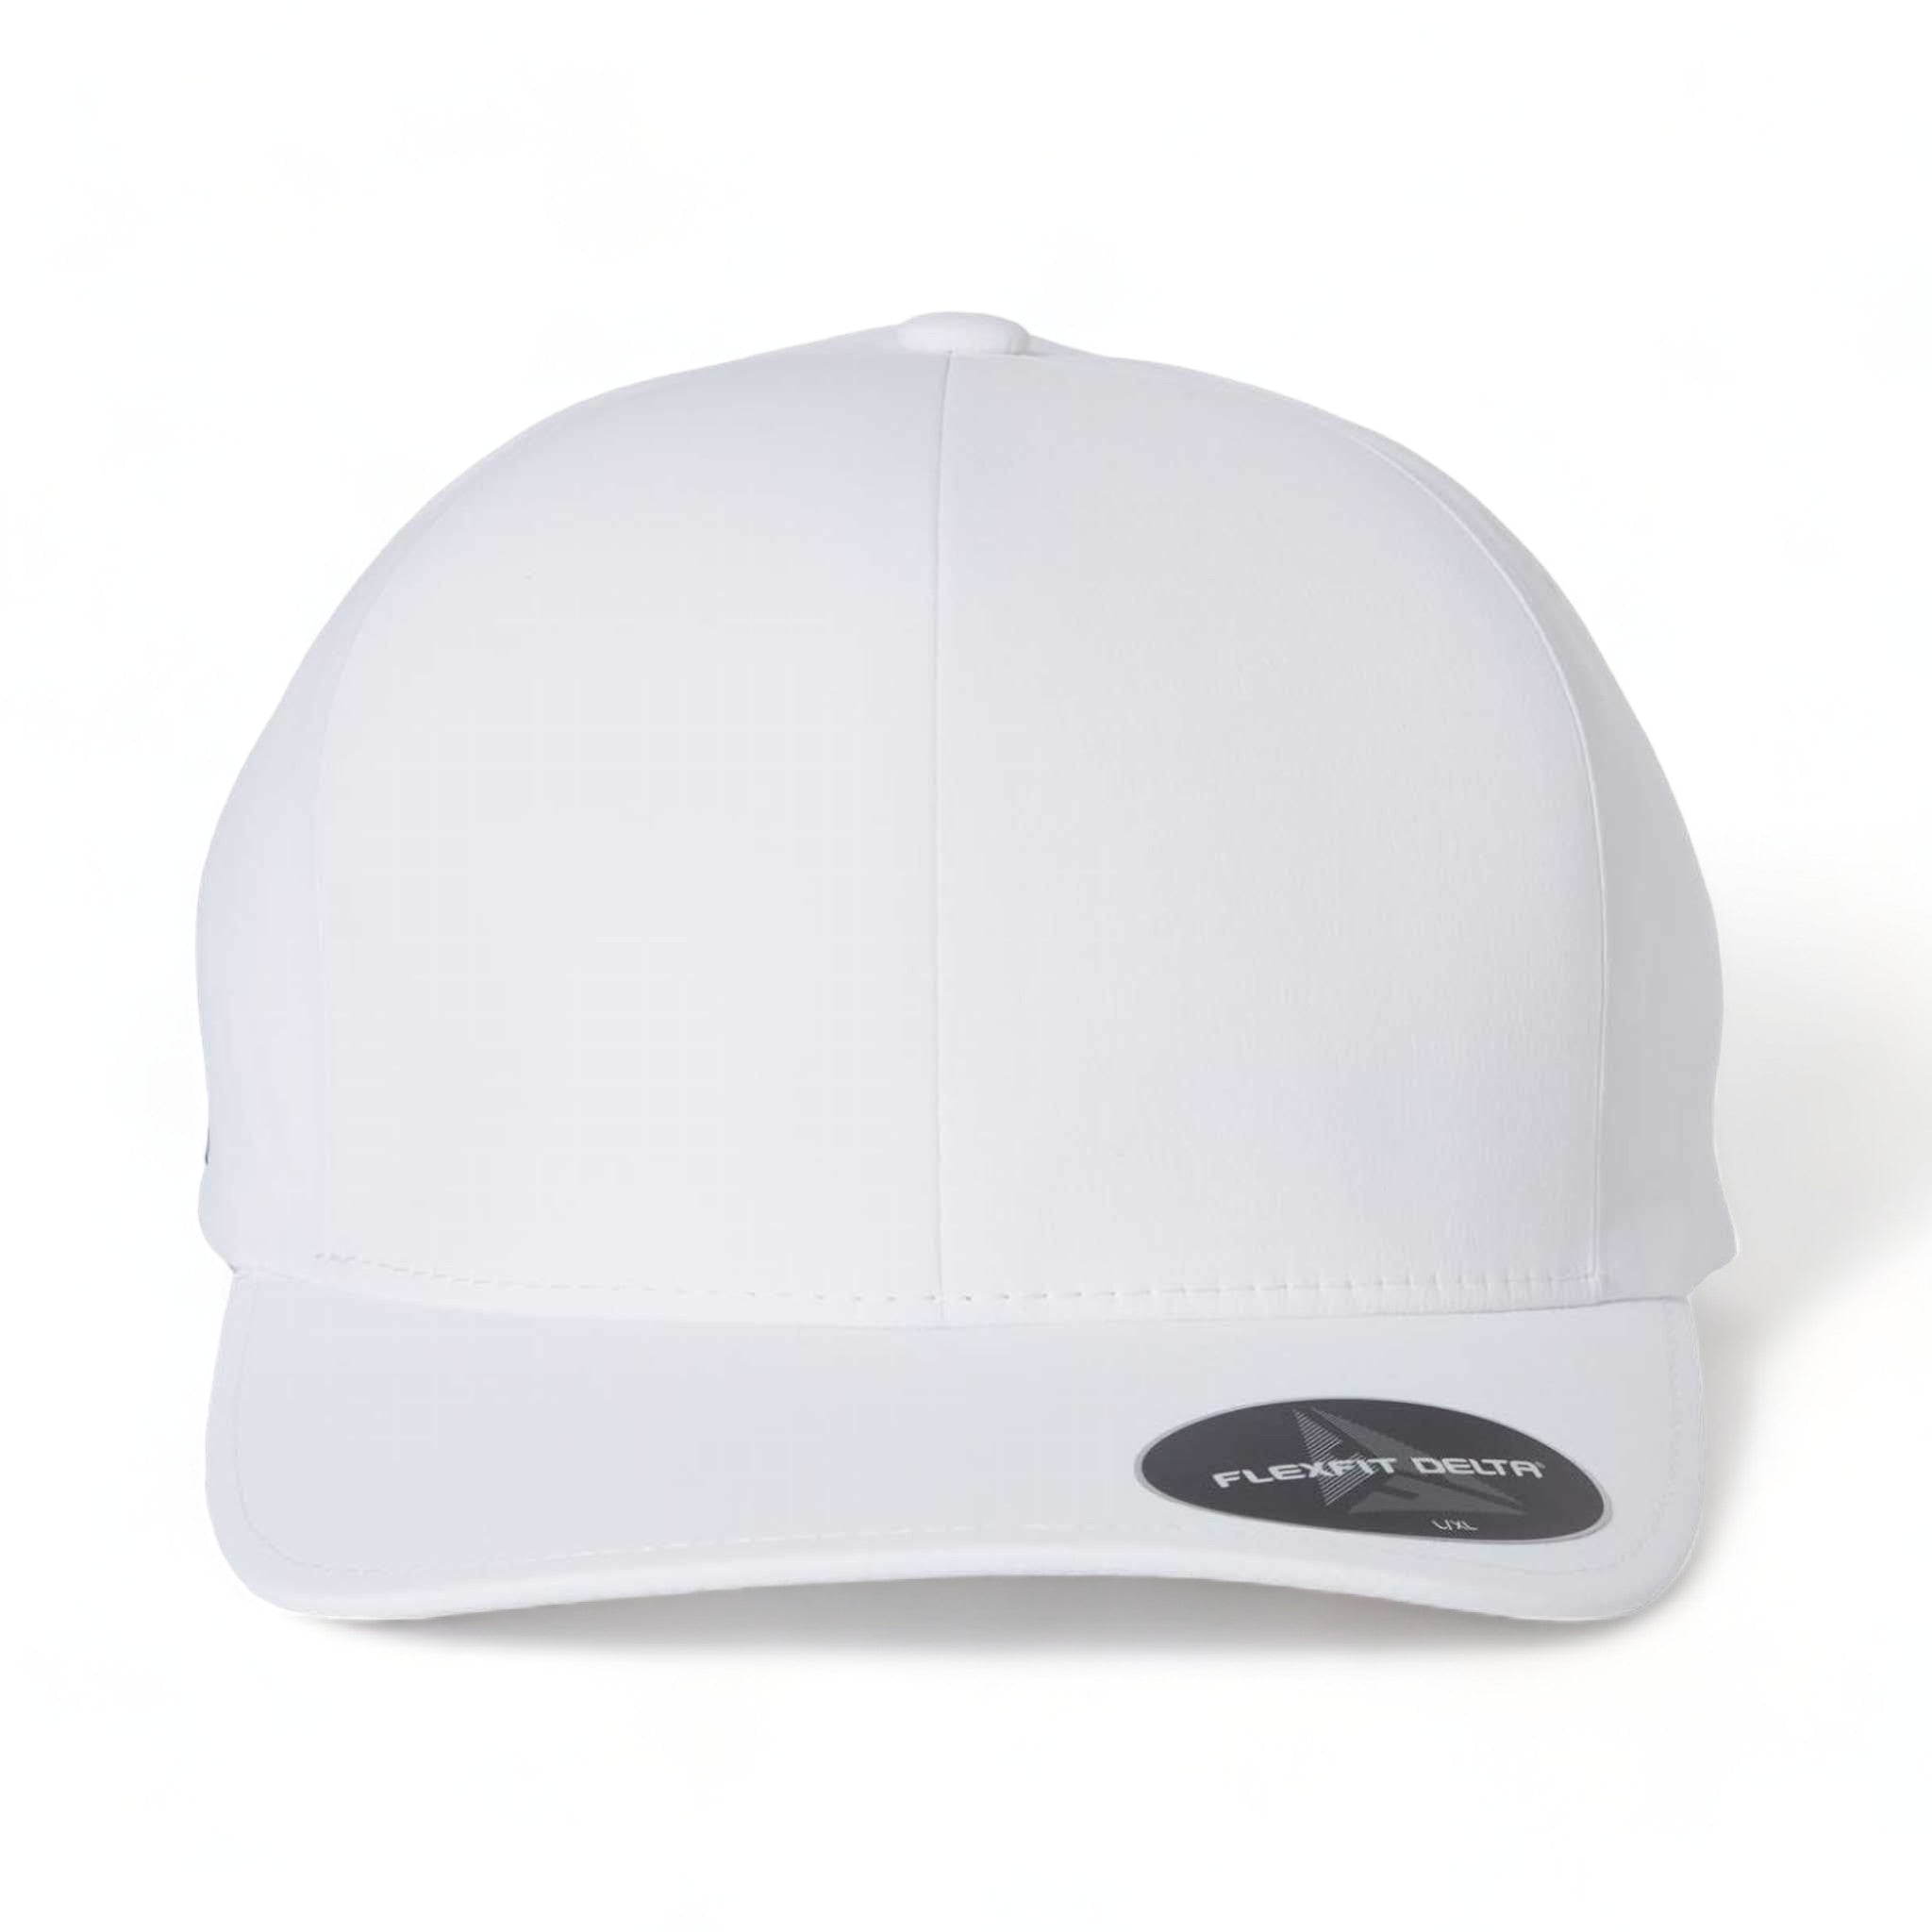 Front view of Flexfit 180 custom hat in white